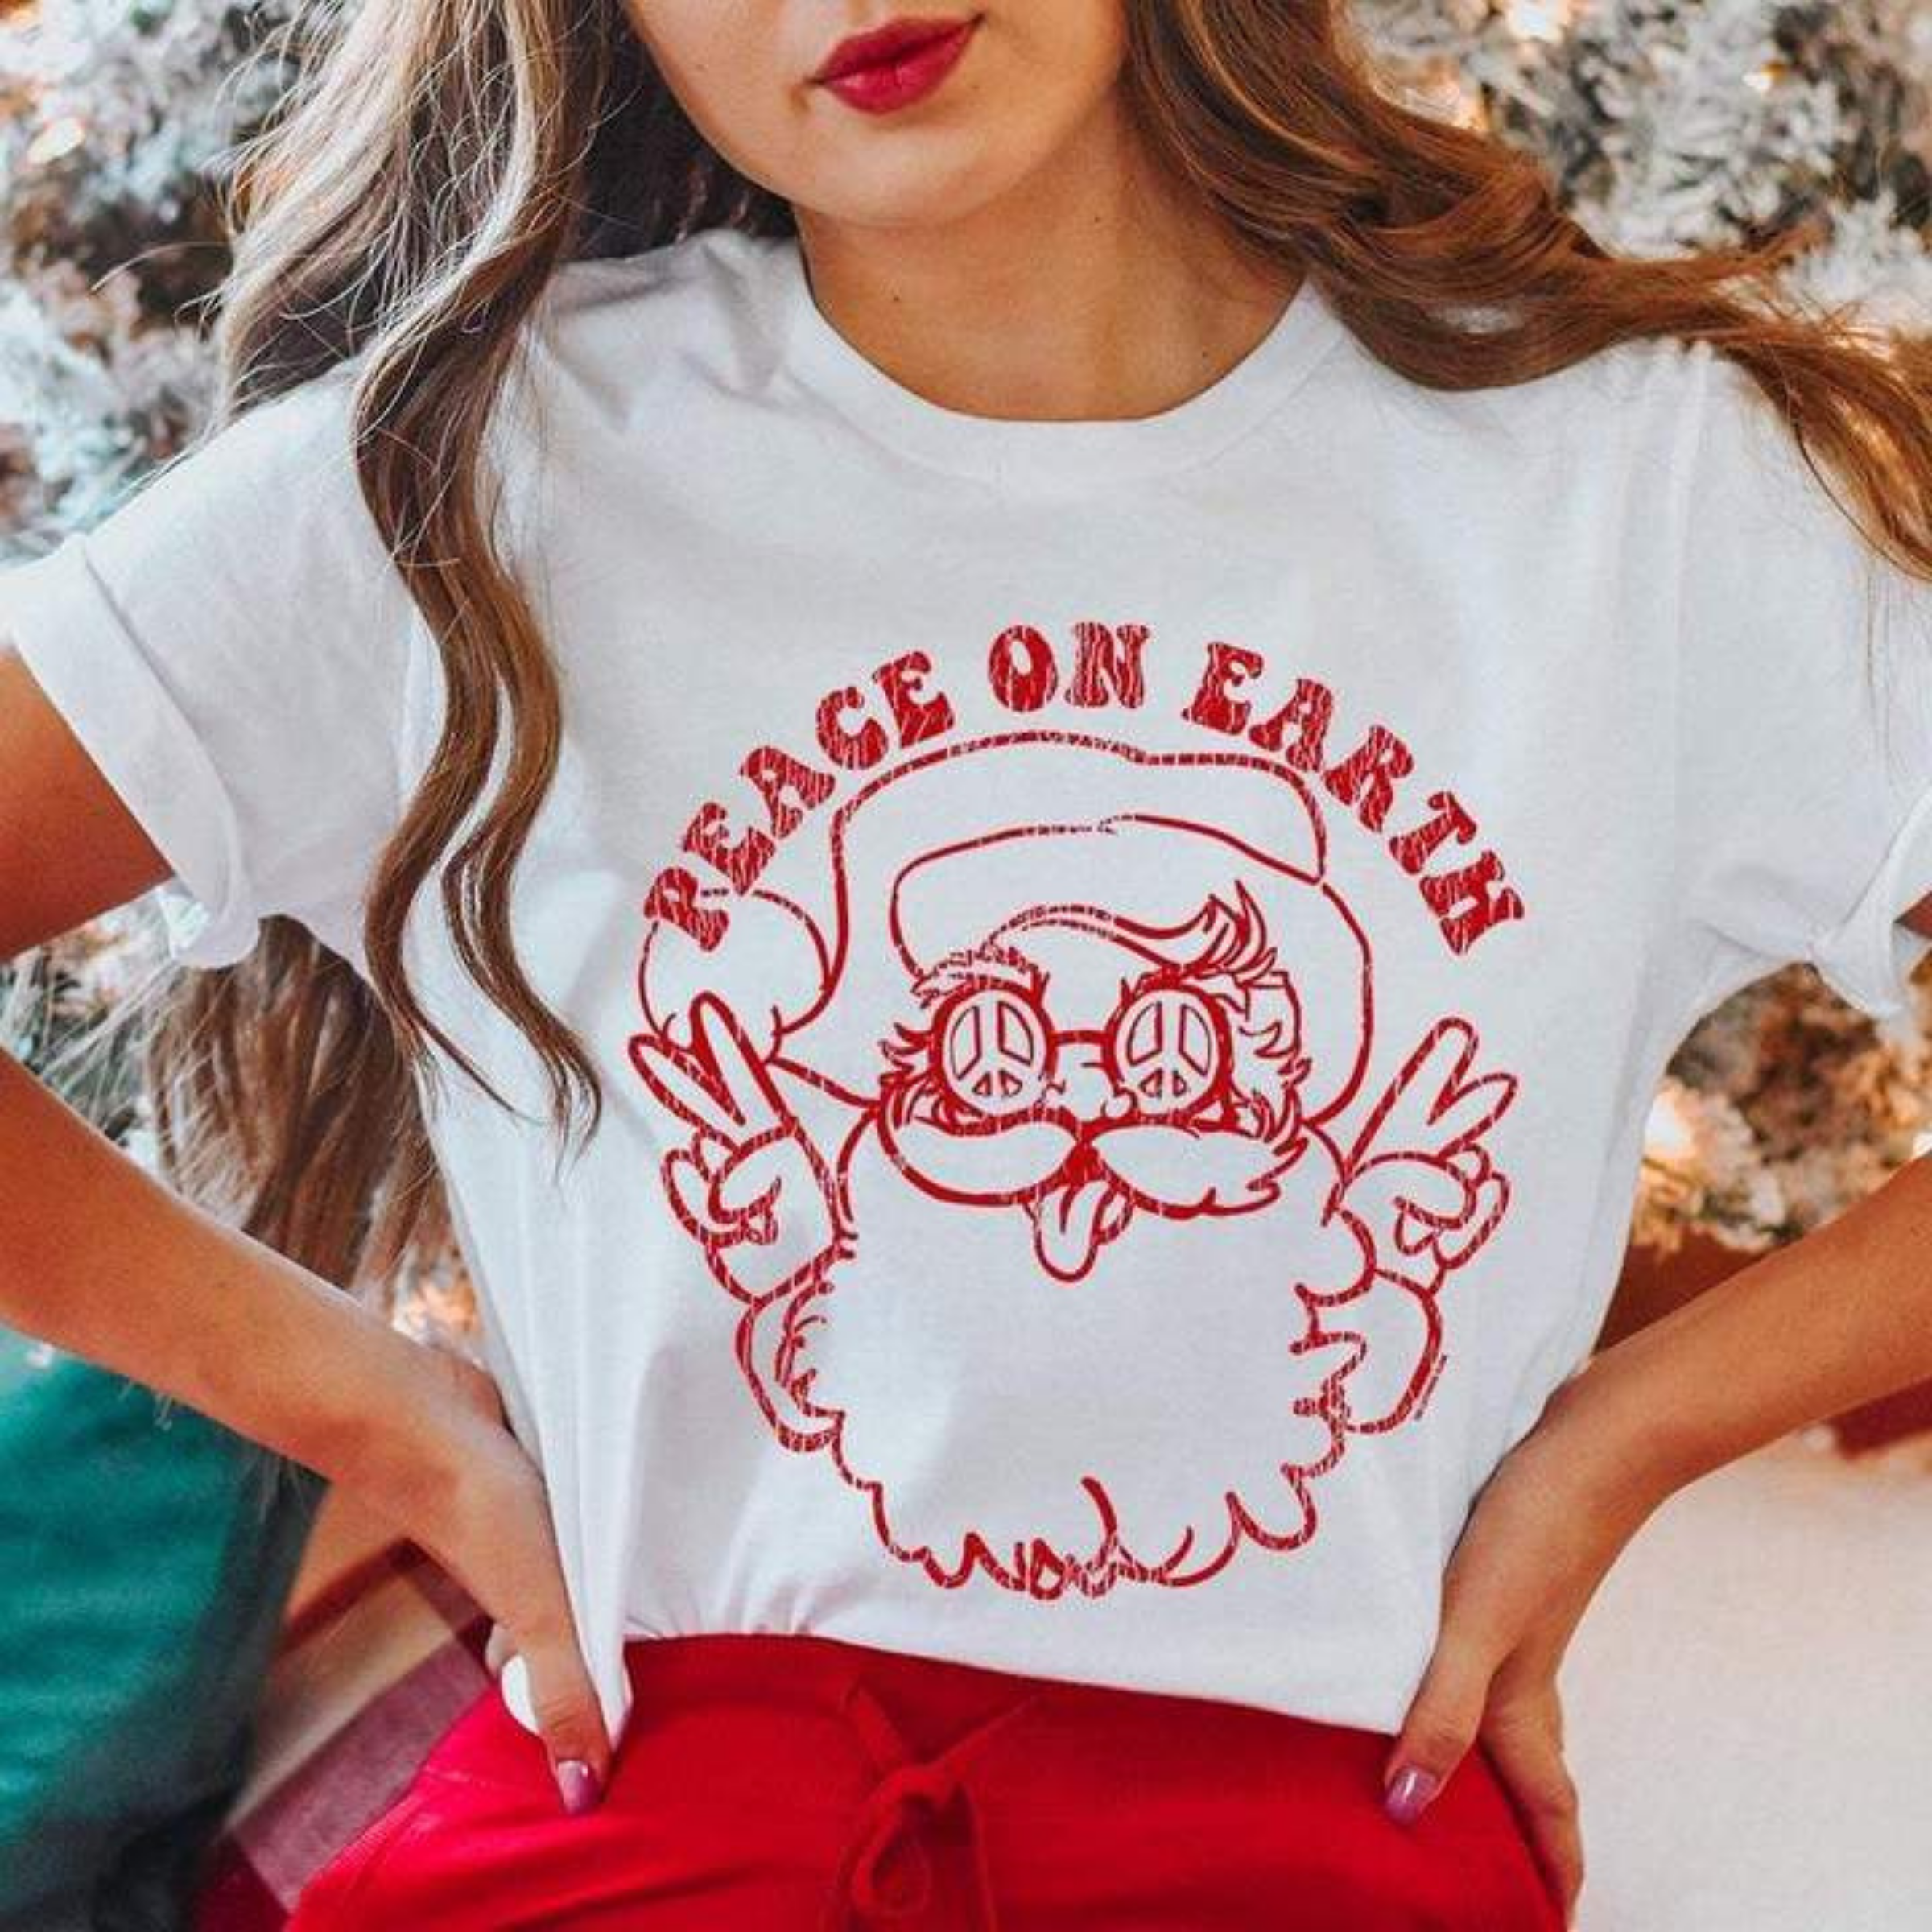 This white tee includes a crew neckline, short sleeves, and a graphic that says "Peace on Earth" and a hippy Santa Clause under the saying all in red. This is shown modeled with rolled sleeves and a pair of red pants. 